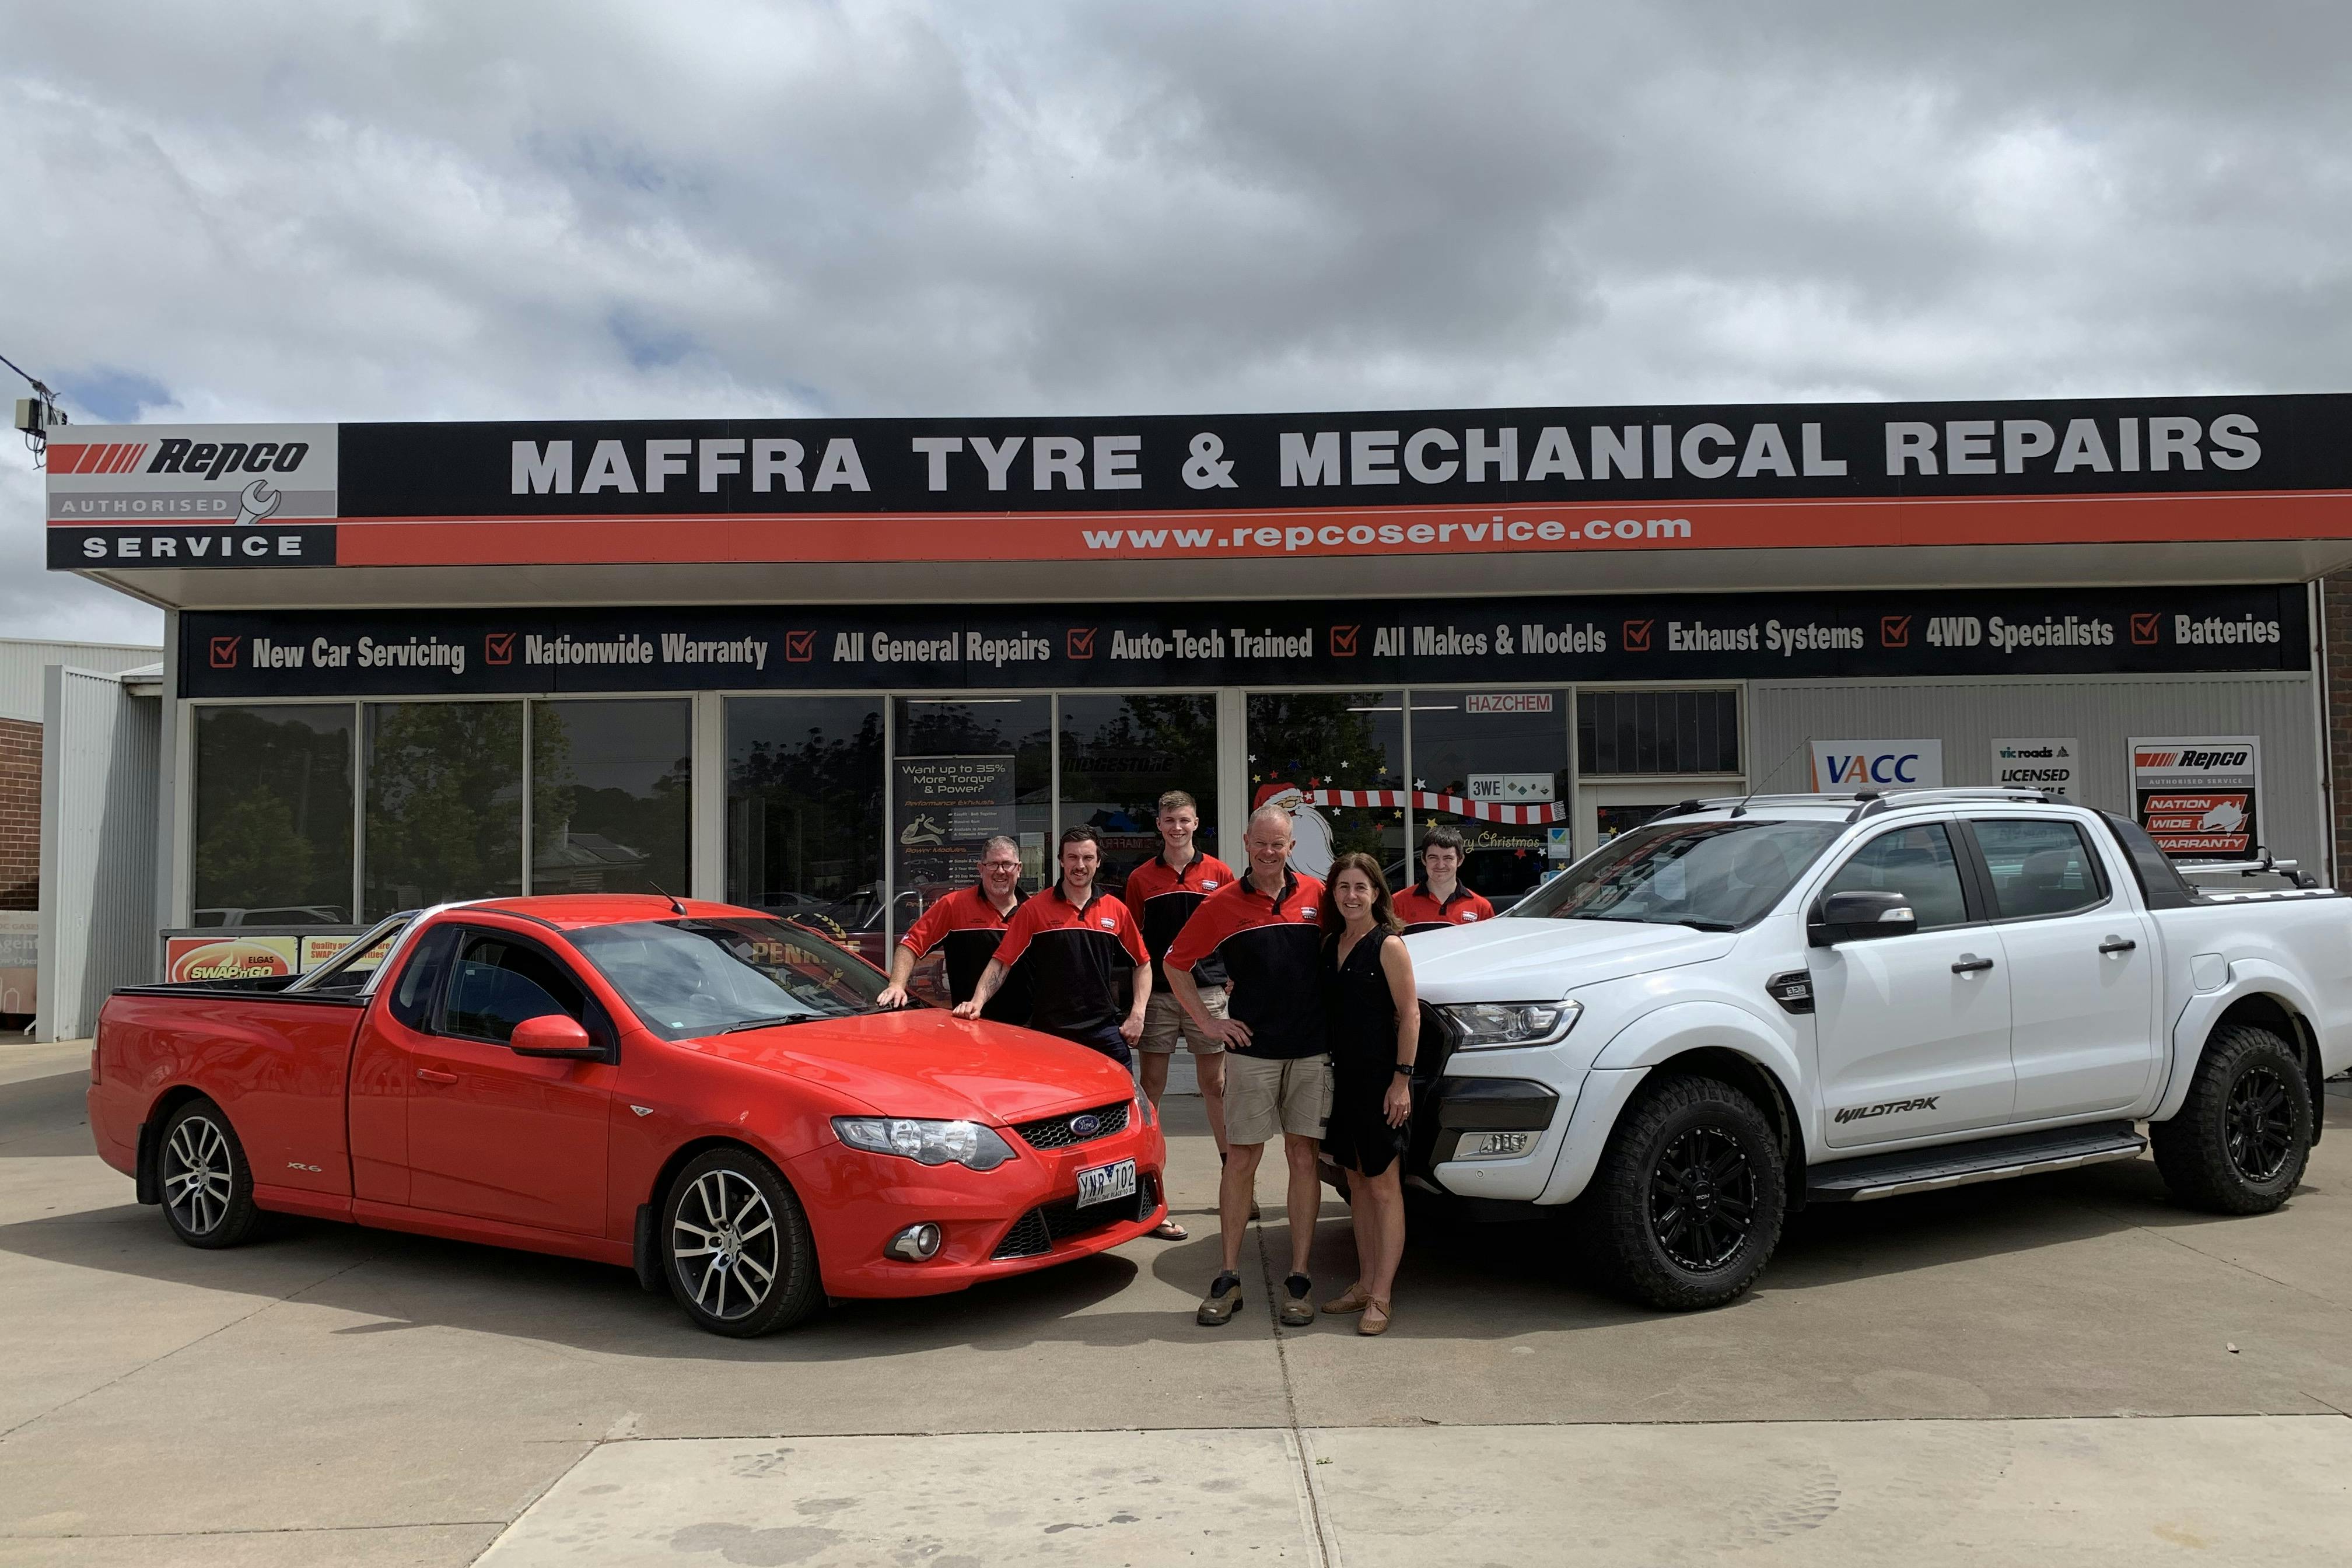 Maffra Tyre and Mechanical Repairs profile photo